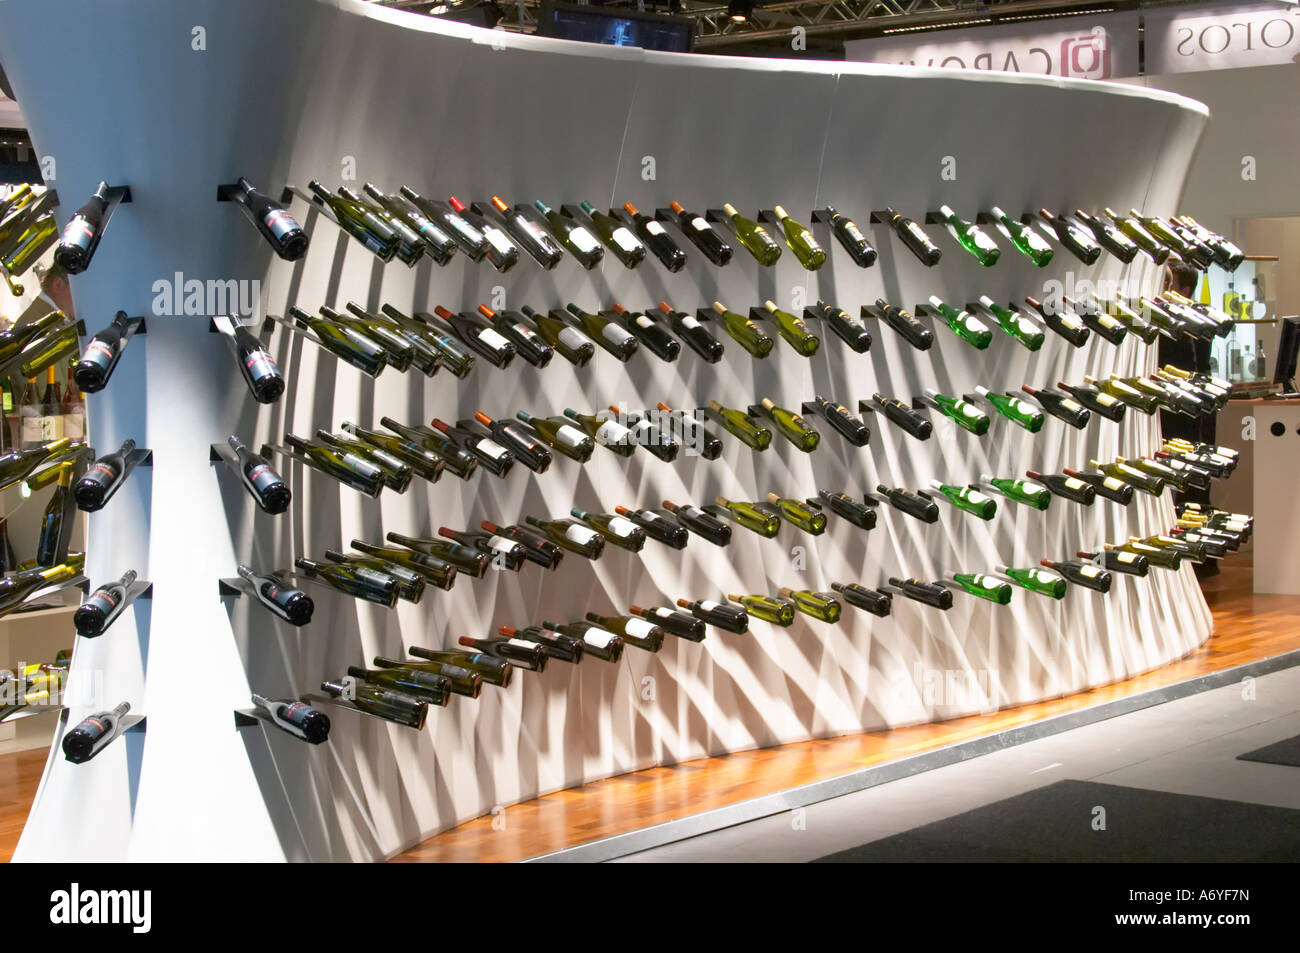 One of the exhibition booths displaying rows of wine bottles in curved